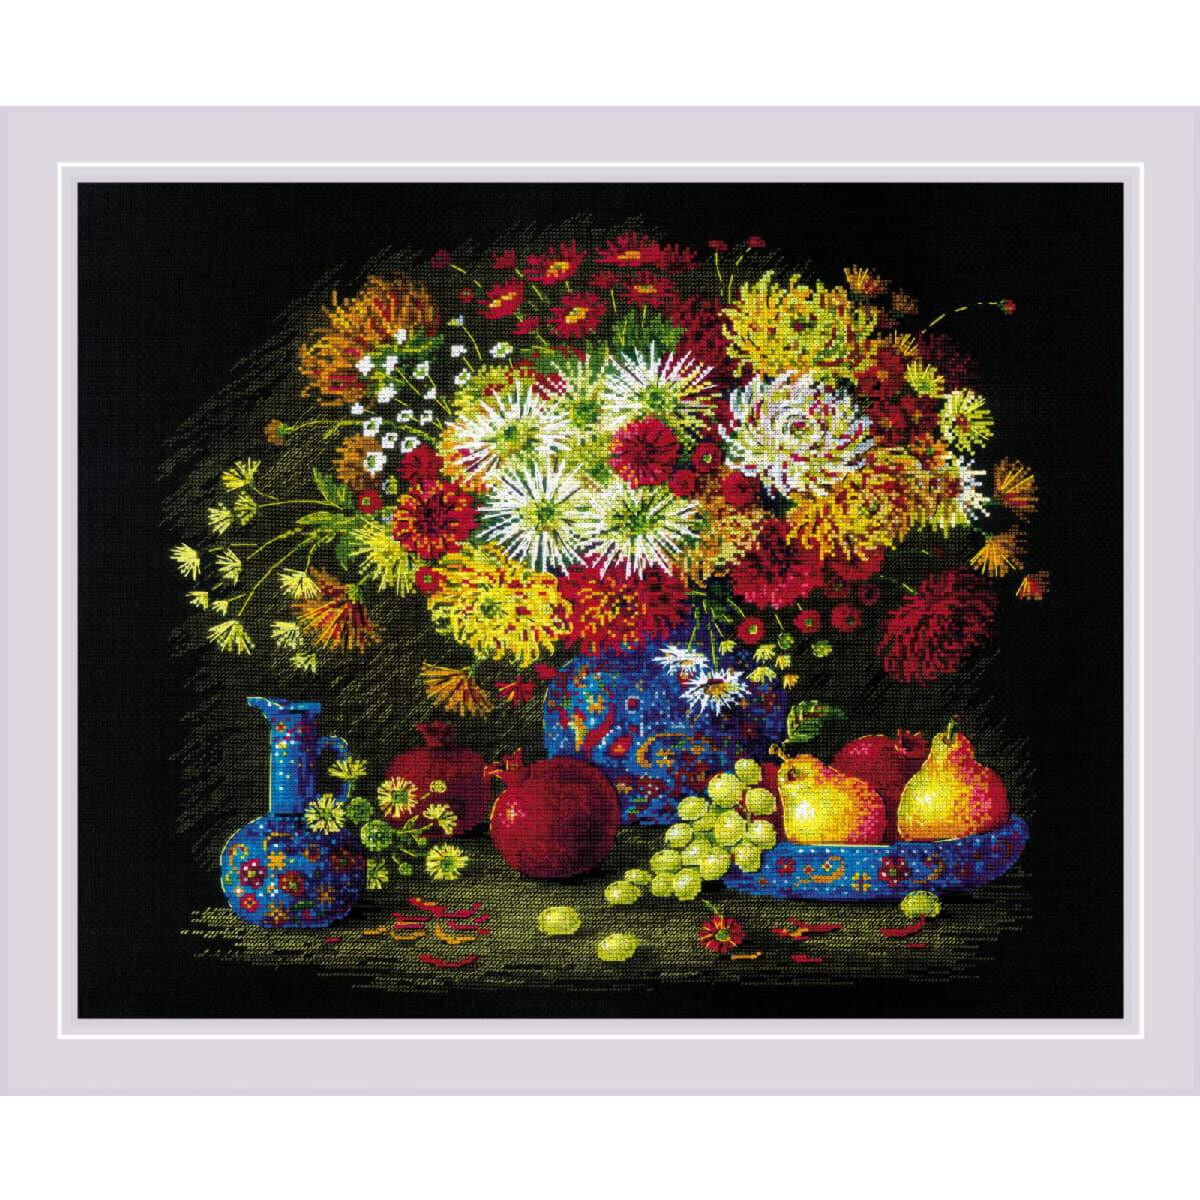 Riolis counted cross stitch kit "Still Life with...